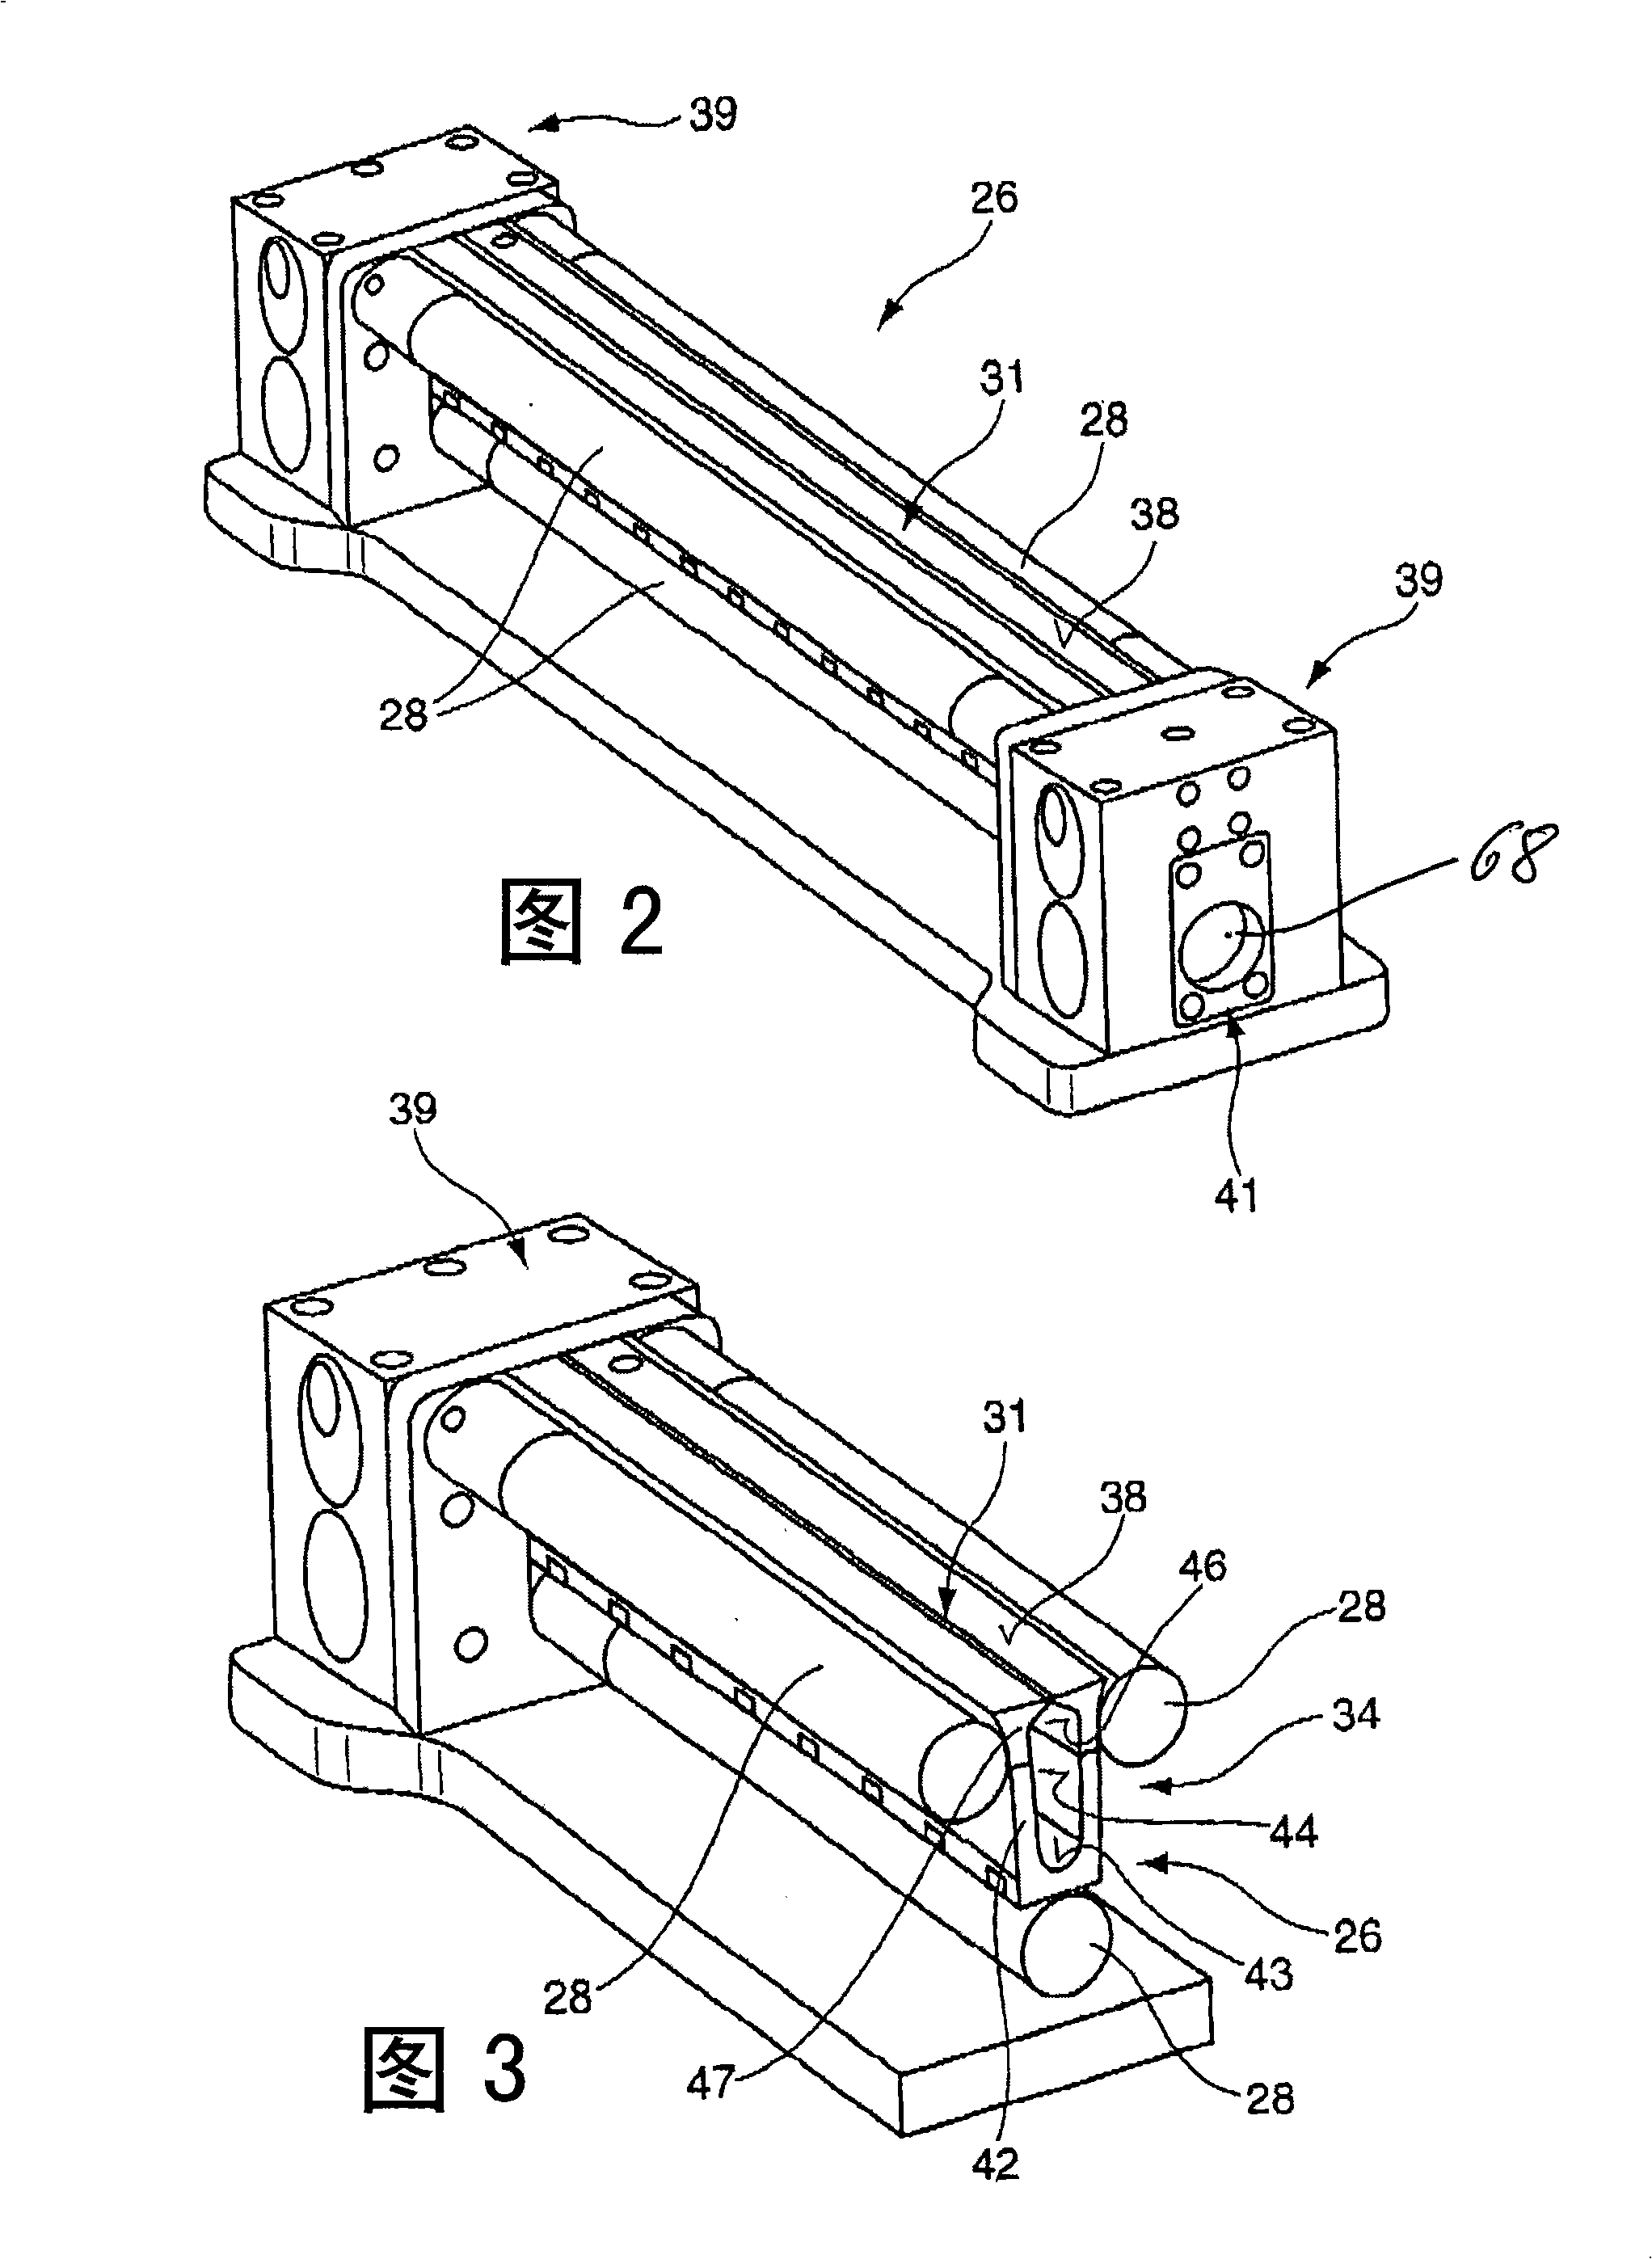 Beam catching device for a processing machine